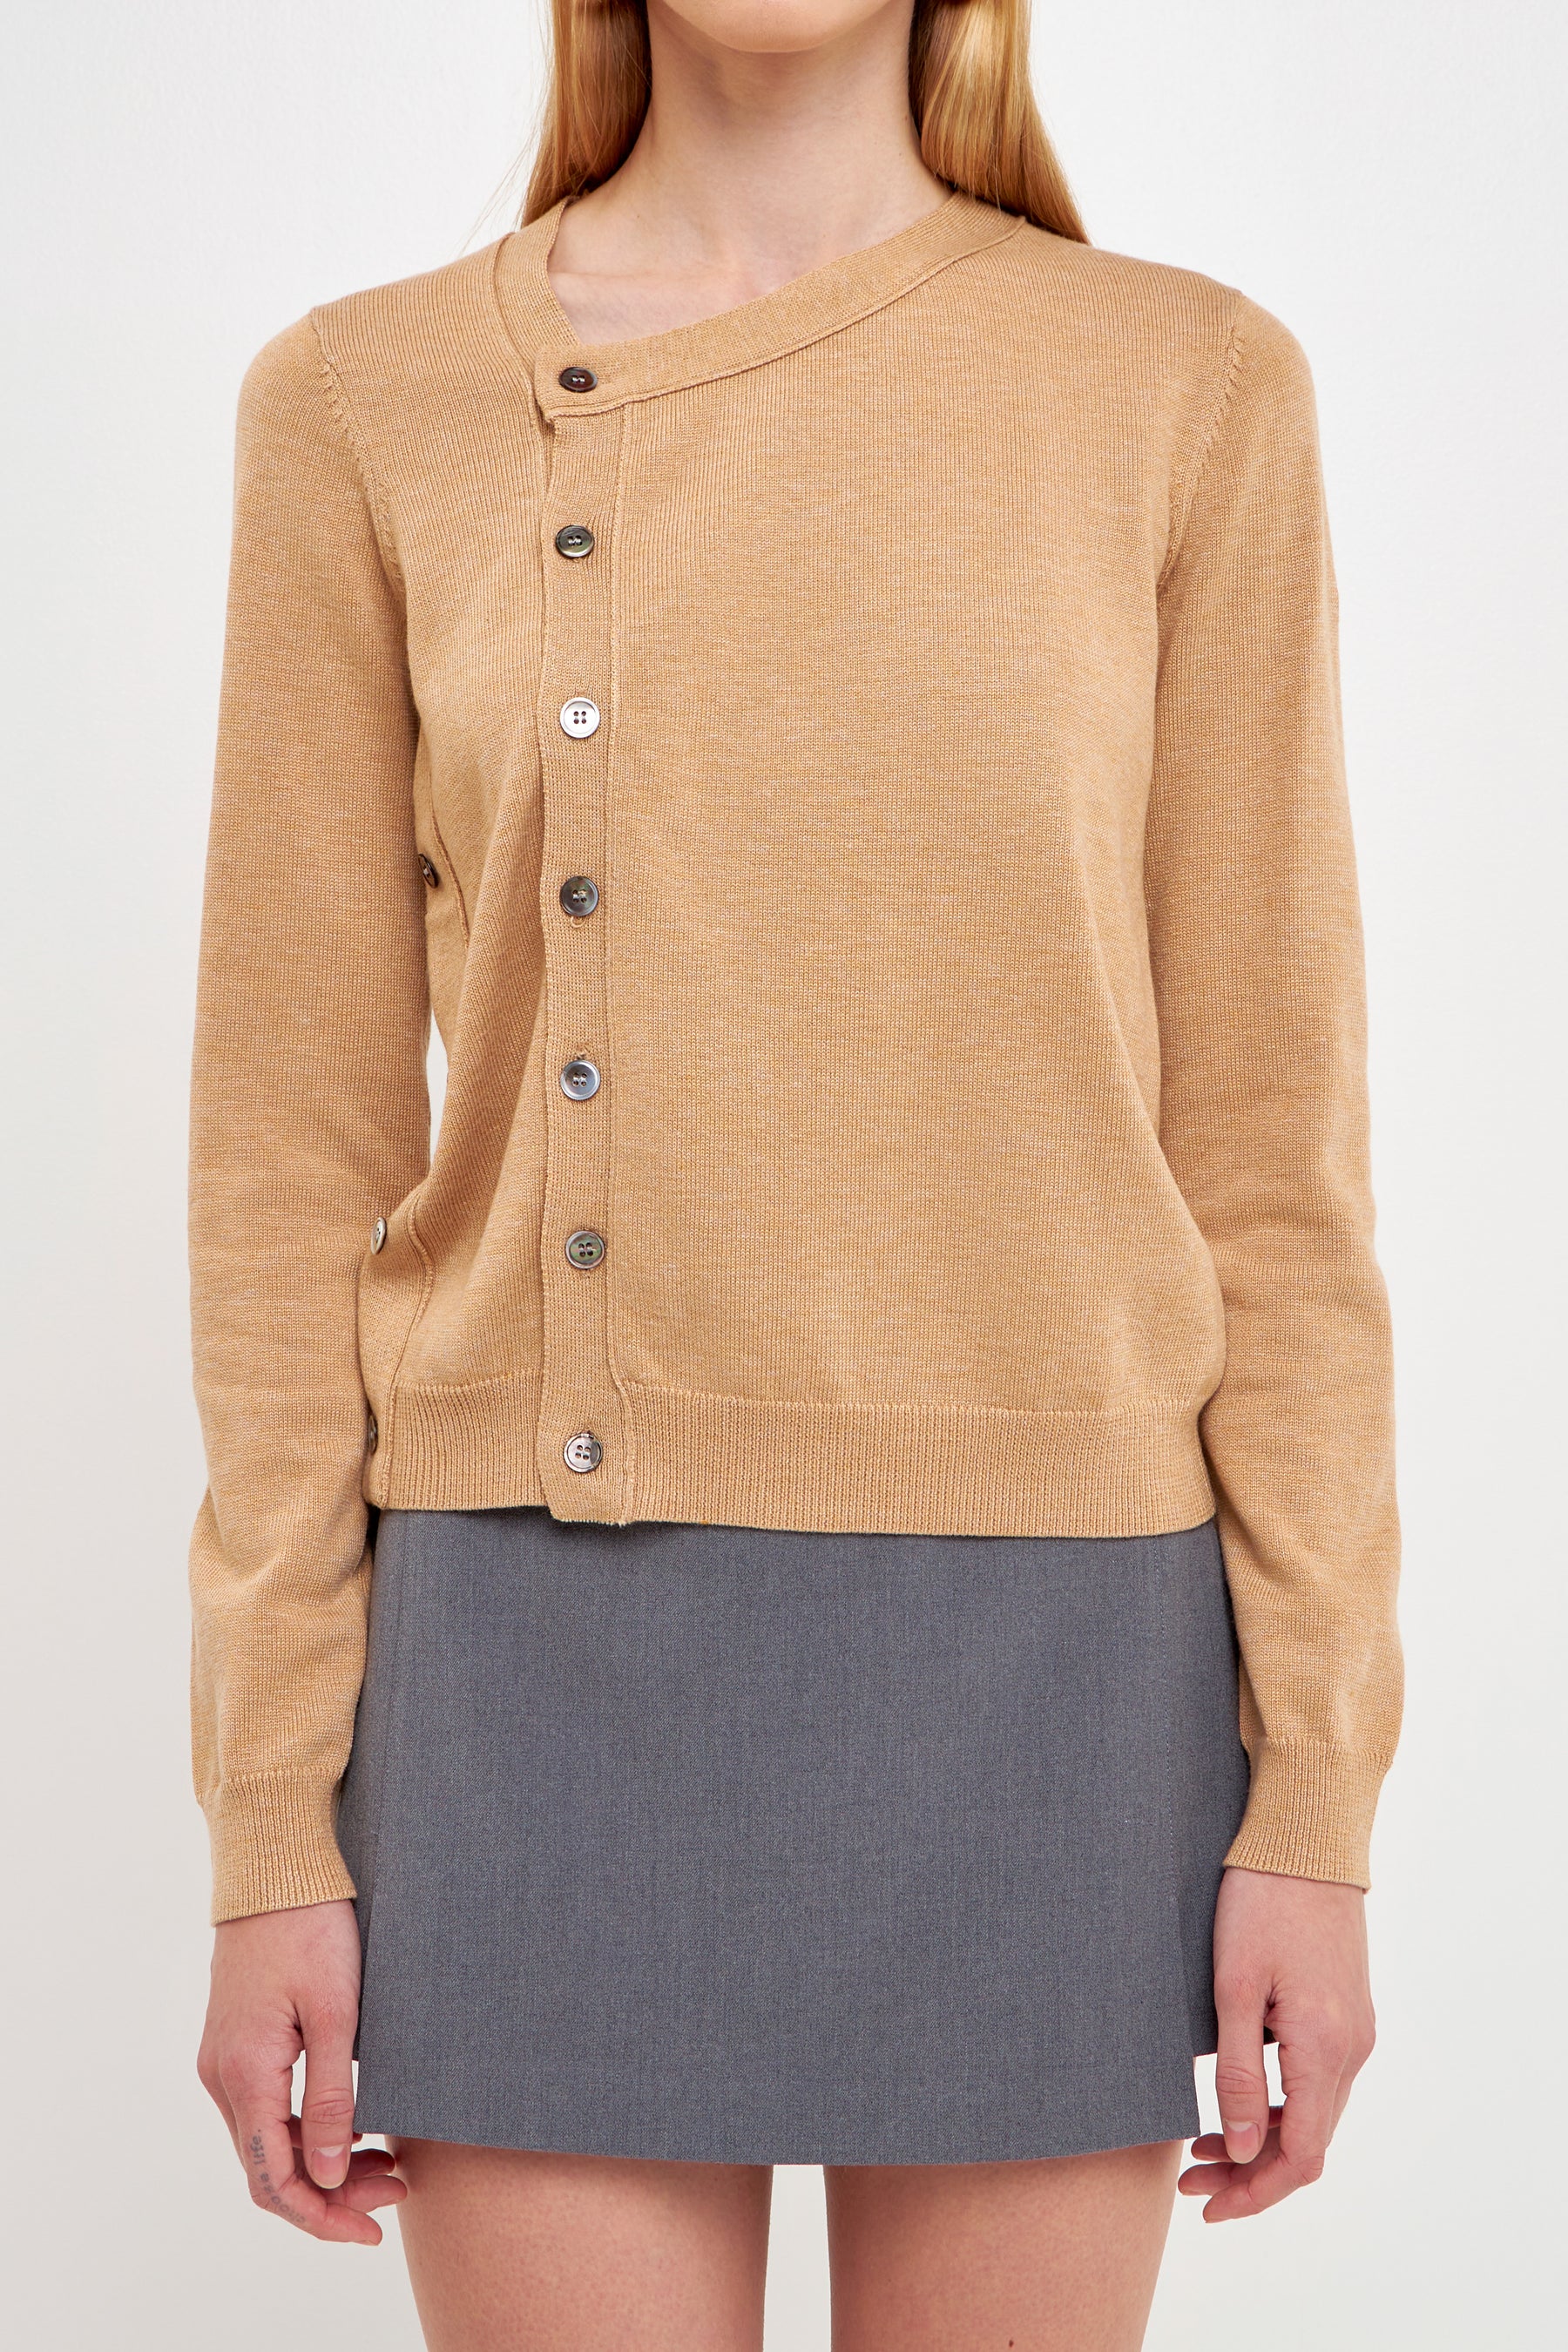 ENDLESS ROSE - Knit Cardigan with Cross Over Buttons - CARDIGANS available at Objectrare